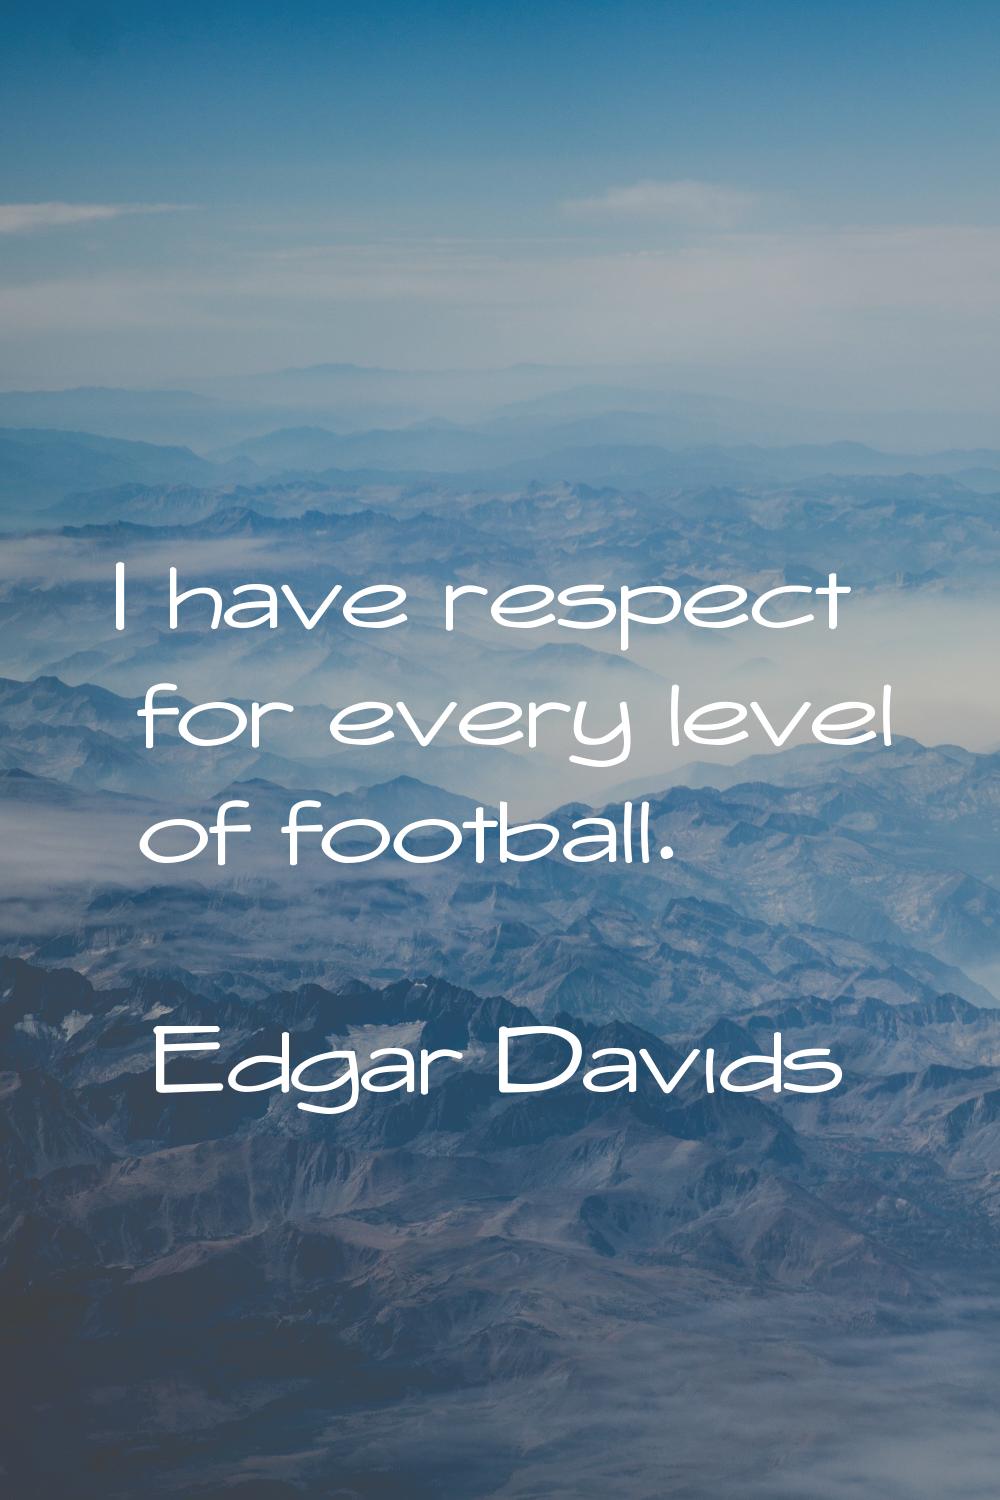 I have respect for every level of football.